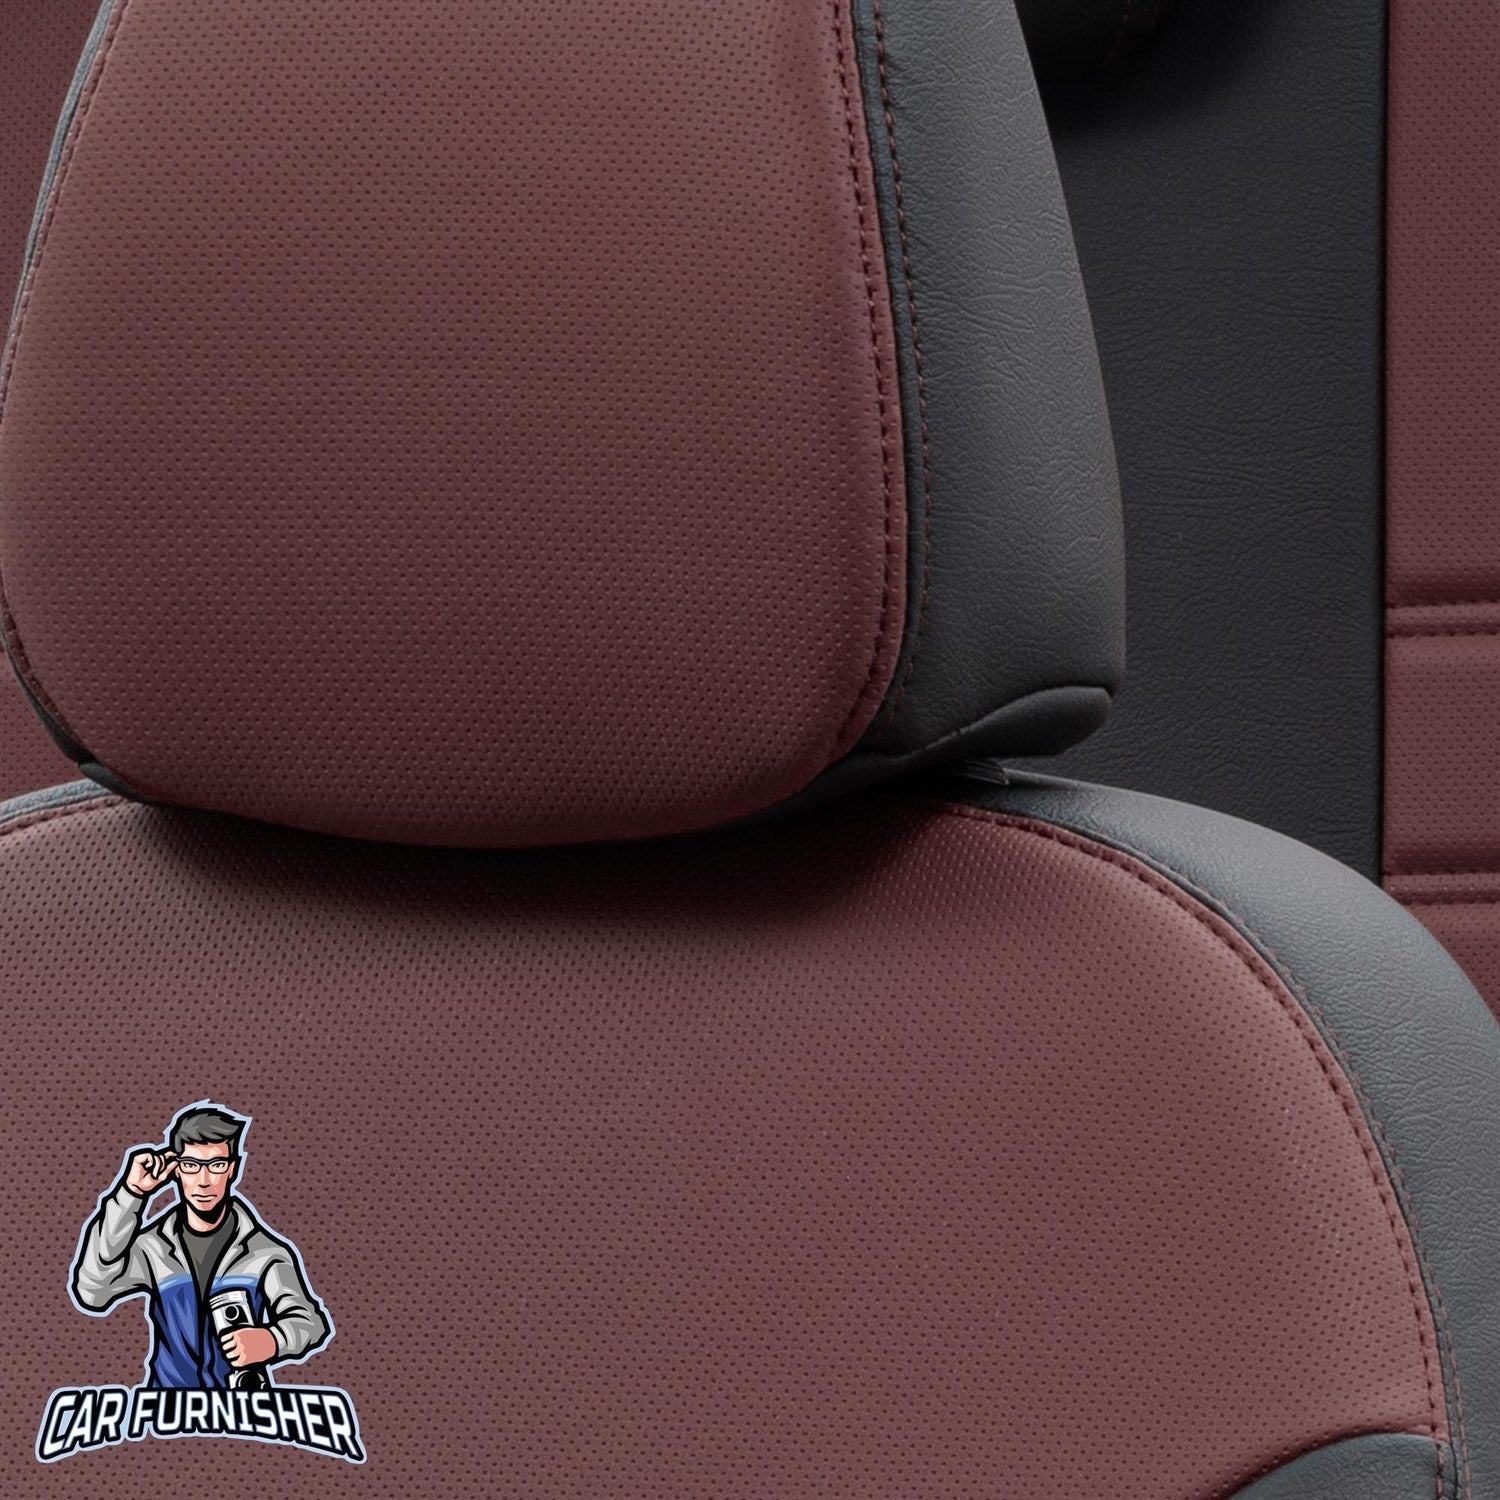 Citroen C5 Seat Covers Istanbul Leather Design Burgundy Leather